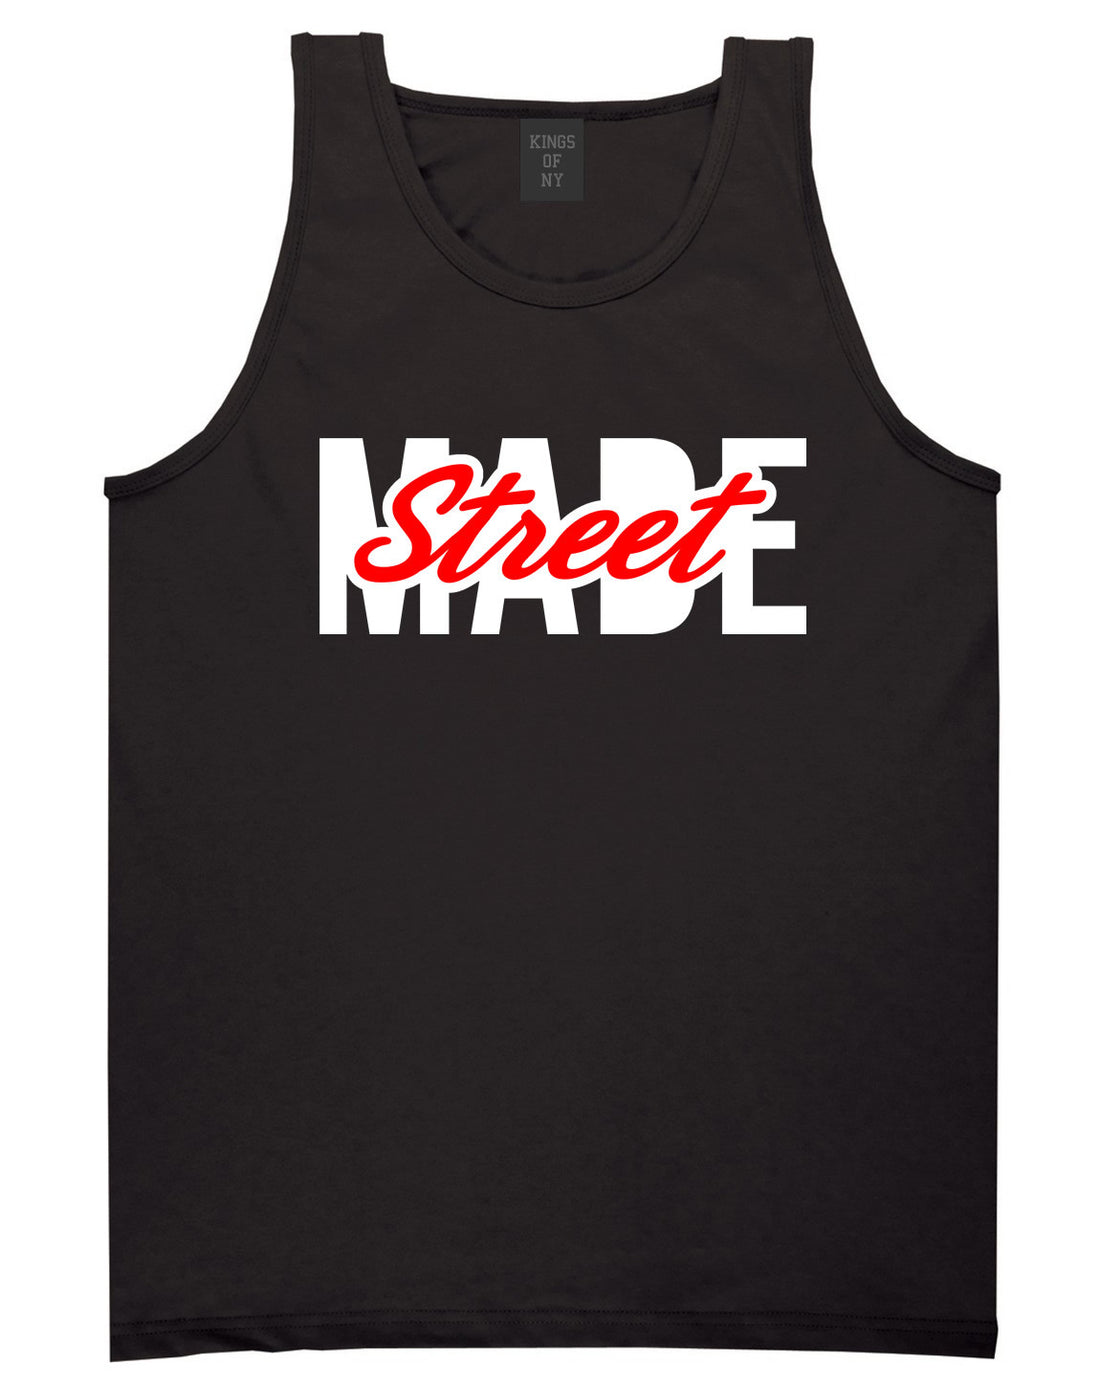 Kings Of NY Street Made Tank Top in Black